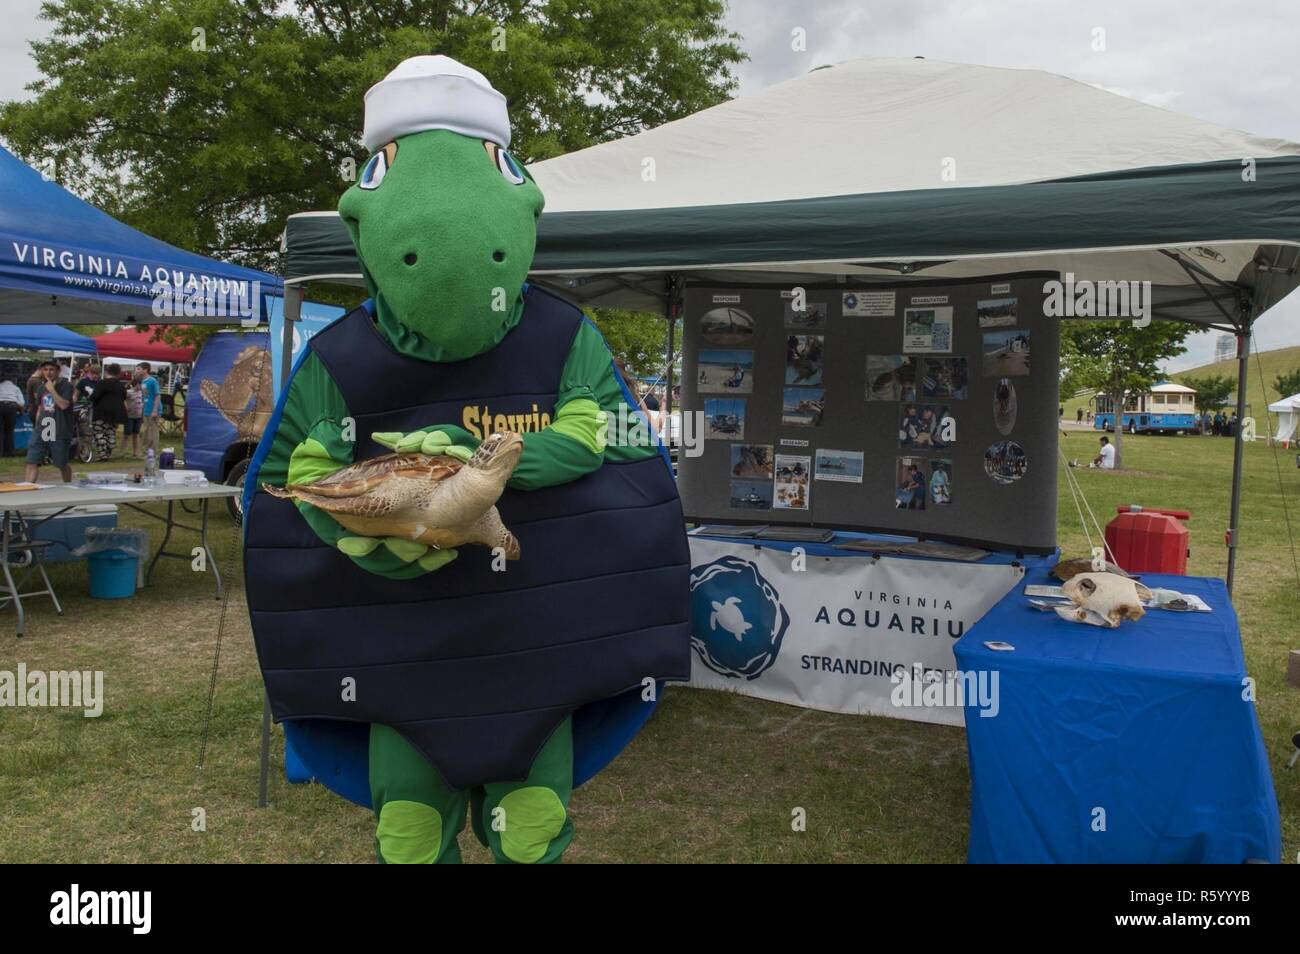 VIRGINIA BEACH, VA (April 22, 2017) - Stewie, the U.S. Navy's environmental turtle mascot, poses with a sea turtle sculpture from the Virginia Aquarium and Marine Science Center near the 'Stewards of the Sea: Defending Freedom, Protecting the Environment' exhibit during Earth Day 2017 at Mount Trashmore. The Virginia Aquarium and the Navy partners to conduct research projects that deploy acoustic transmitters and satellite tracking tags on rehabilitated and released sea turtles with the goal of learning more about residency times, migration patterns and foraging areas within the Chesapeake Bay Stock Photo